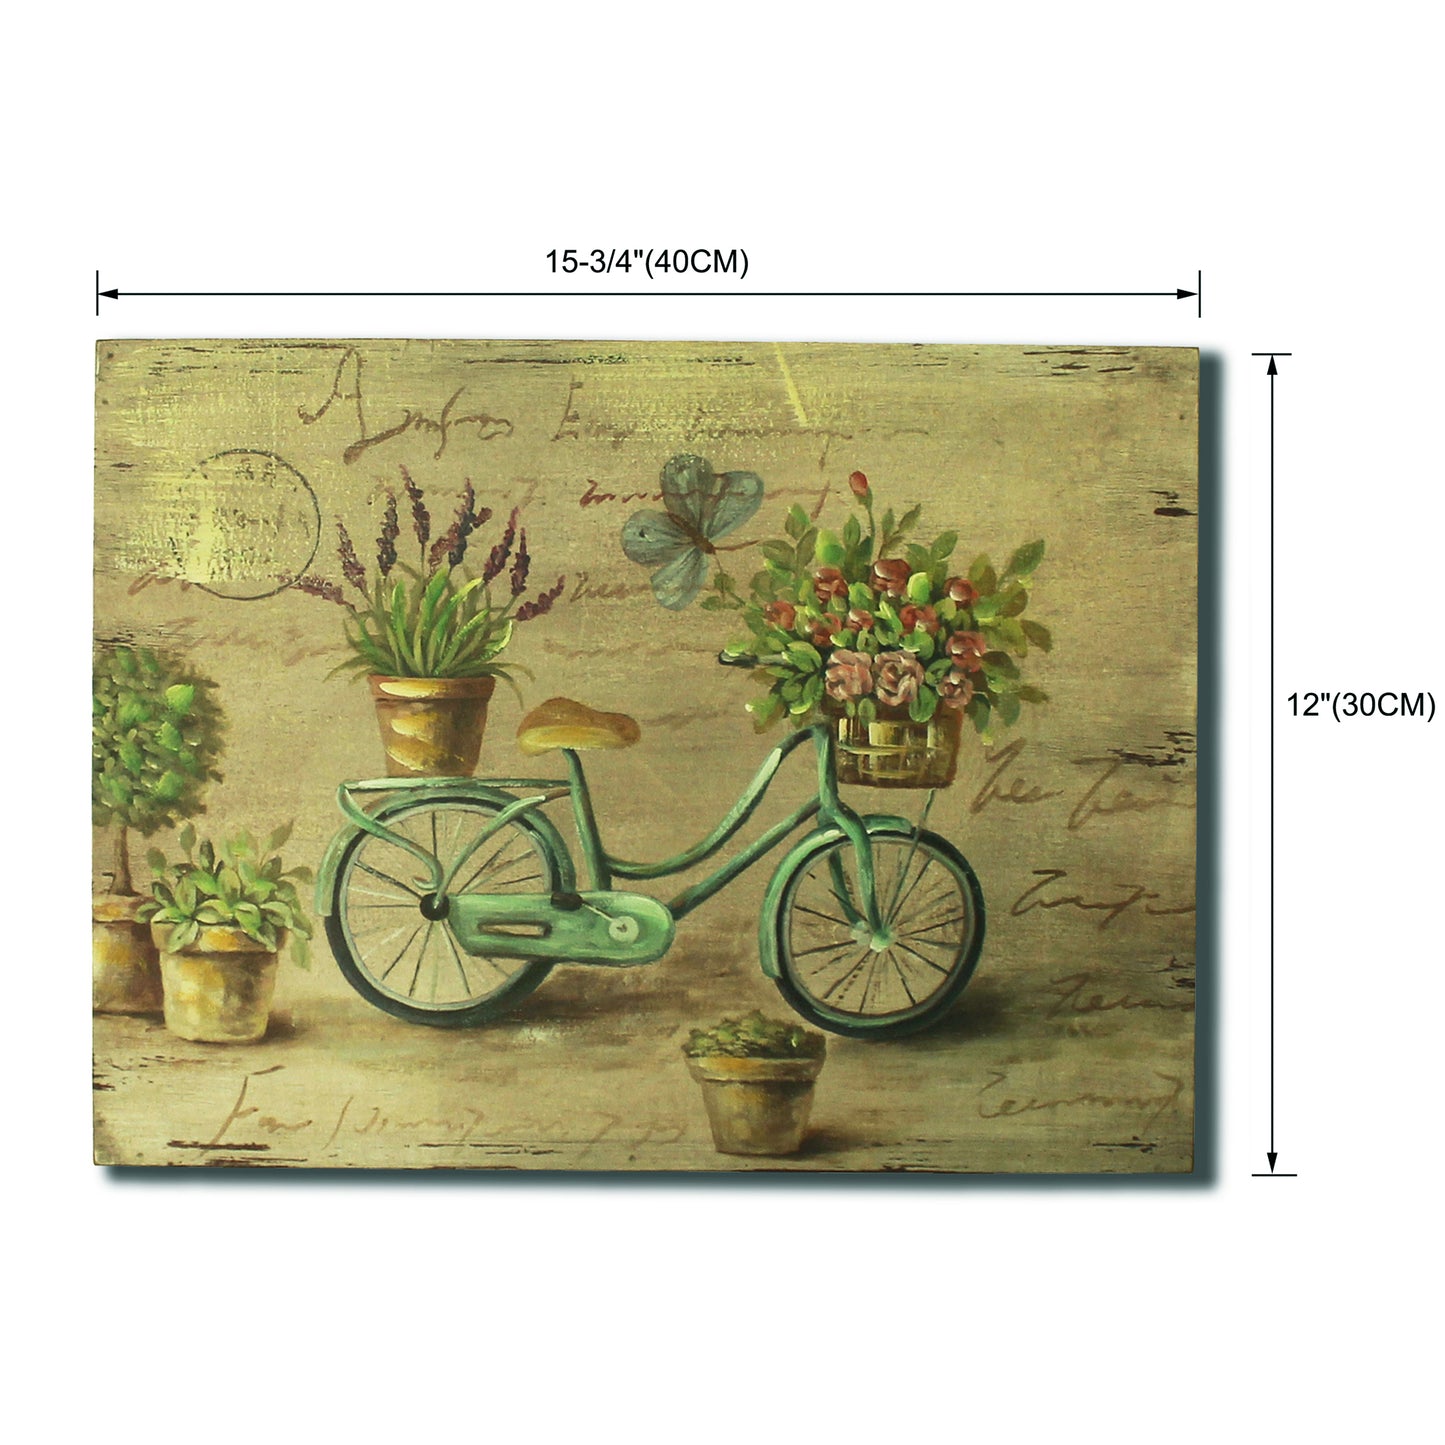 CVHOMEDECO. Rustic Retro Hand Painted Wooden Frame Wall Hanging 3D Painting Decoration Art, Bicycle Flower Butterfly Design, 15.75 x 12 Inch